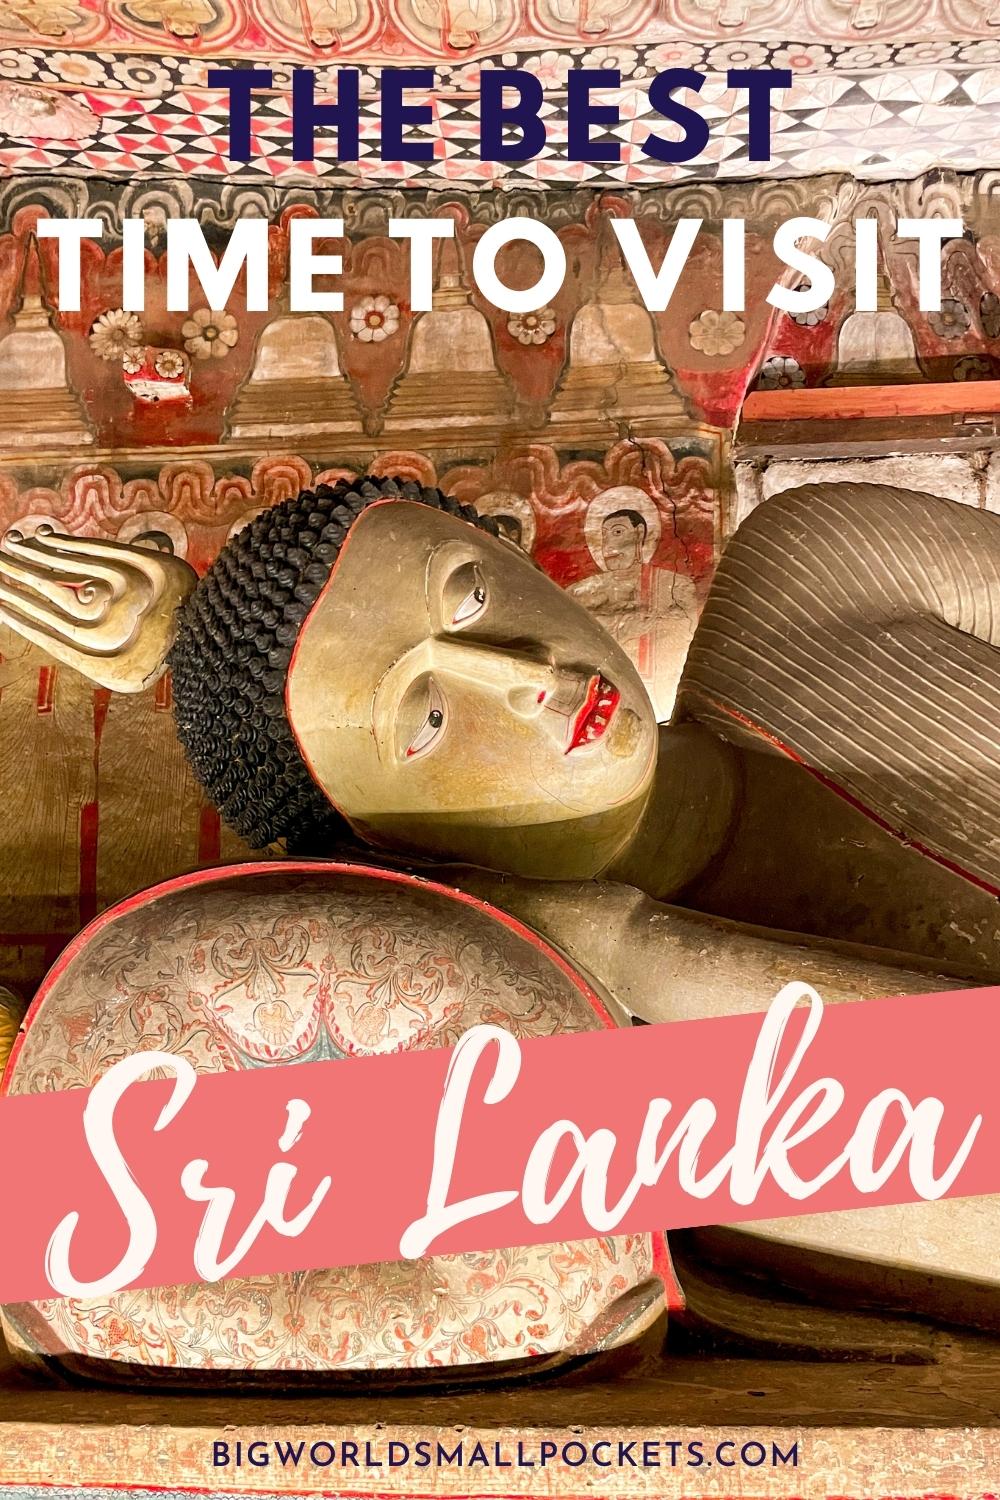 When is the Best Time to Visit Sri Lanka